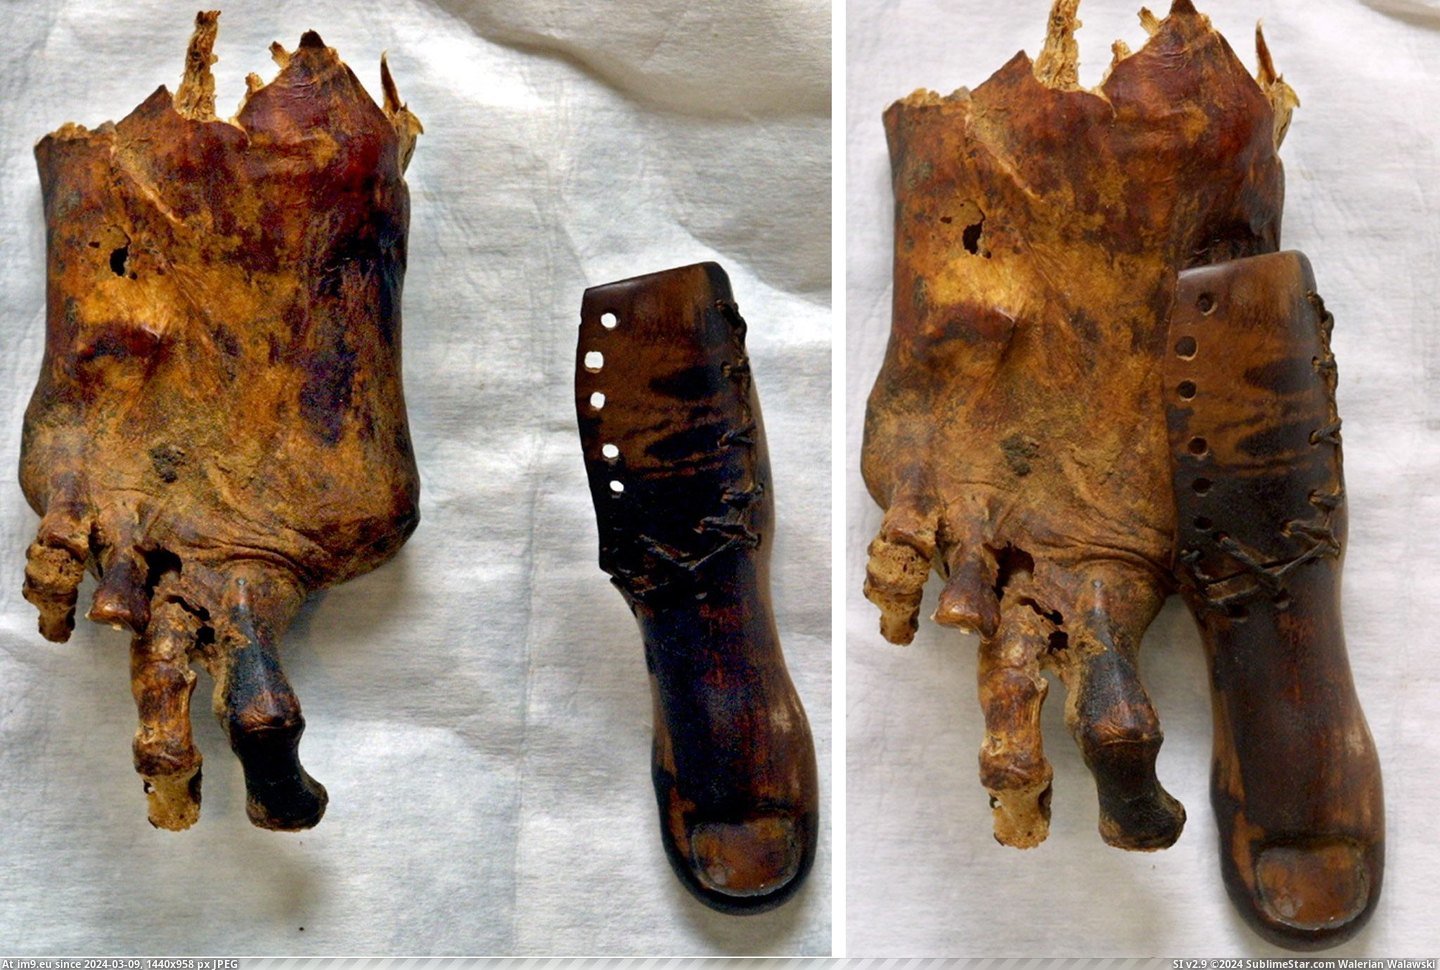 #Wtf #Years #Old #Prosthetic #Mummy #Foot #Toe #Egyptian [Wtf] Foot of egyptian mummy with a prosthetic toe. 3000 years old. Pic. (Image of album My r/WTF favs))